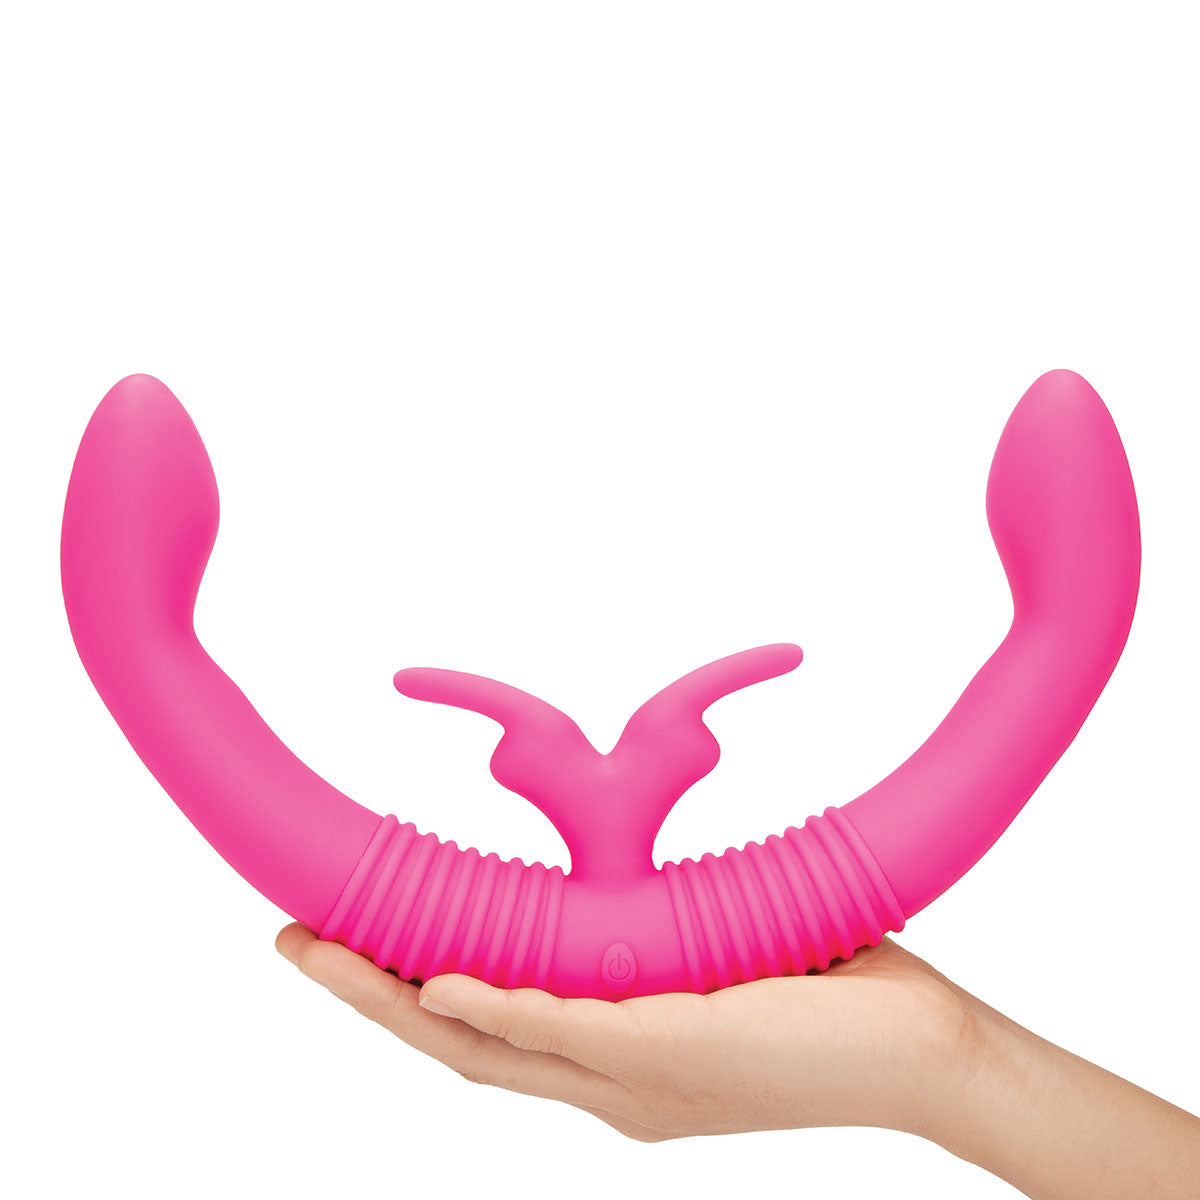 Enhance intimacy with Together Vibe - G-Spot Vibrator